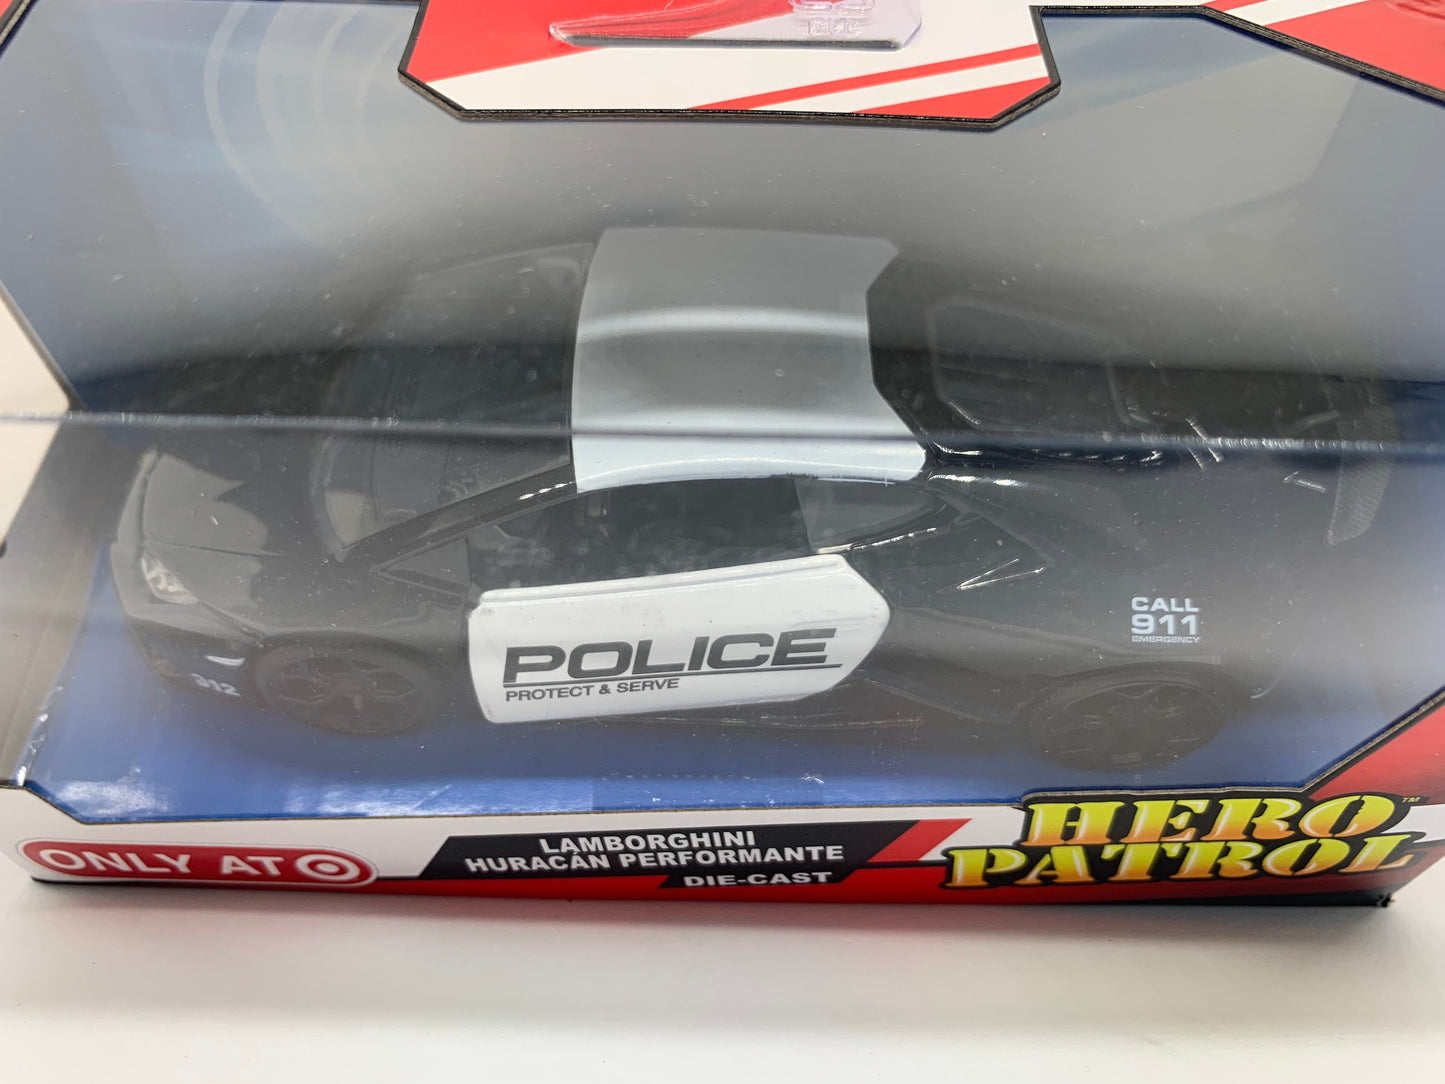 Jada Lamborghini Huracan Perfomante Police Black and White Hero Patrol Perfect Birthday Gift Collectable Scale Model Toy Car